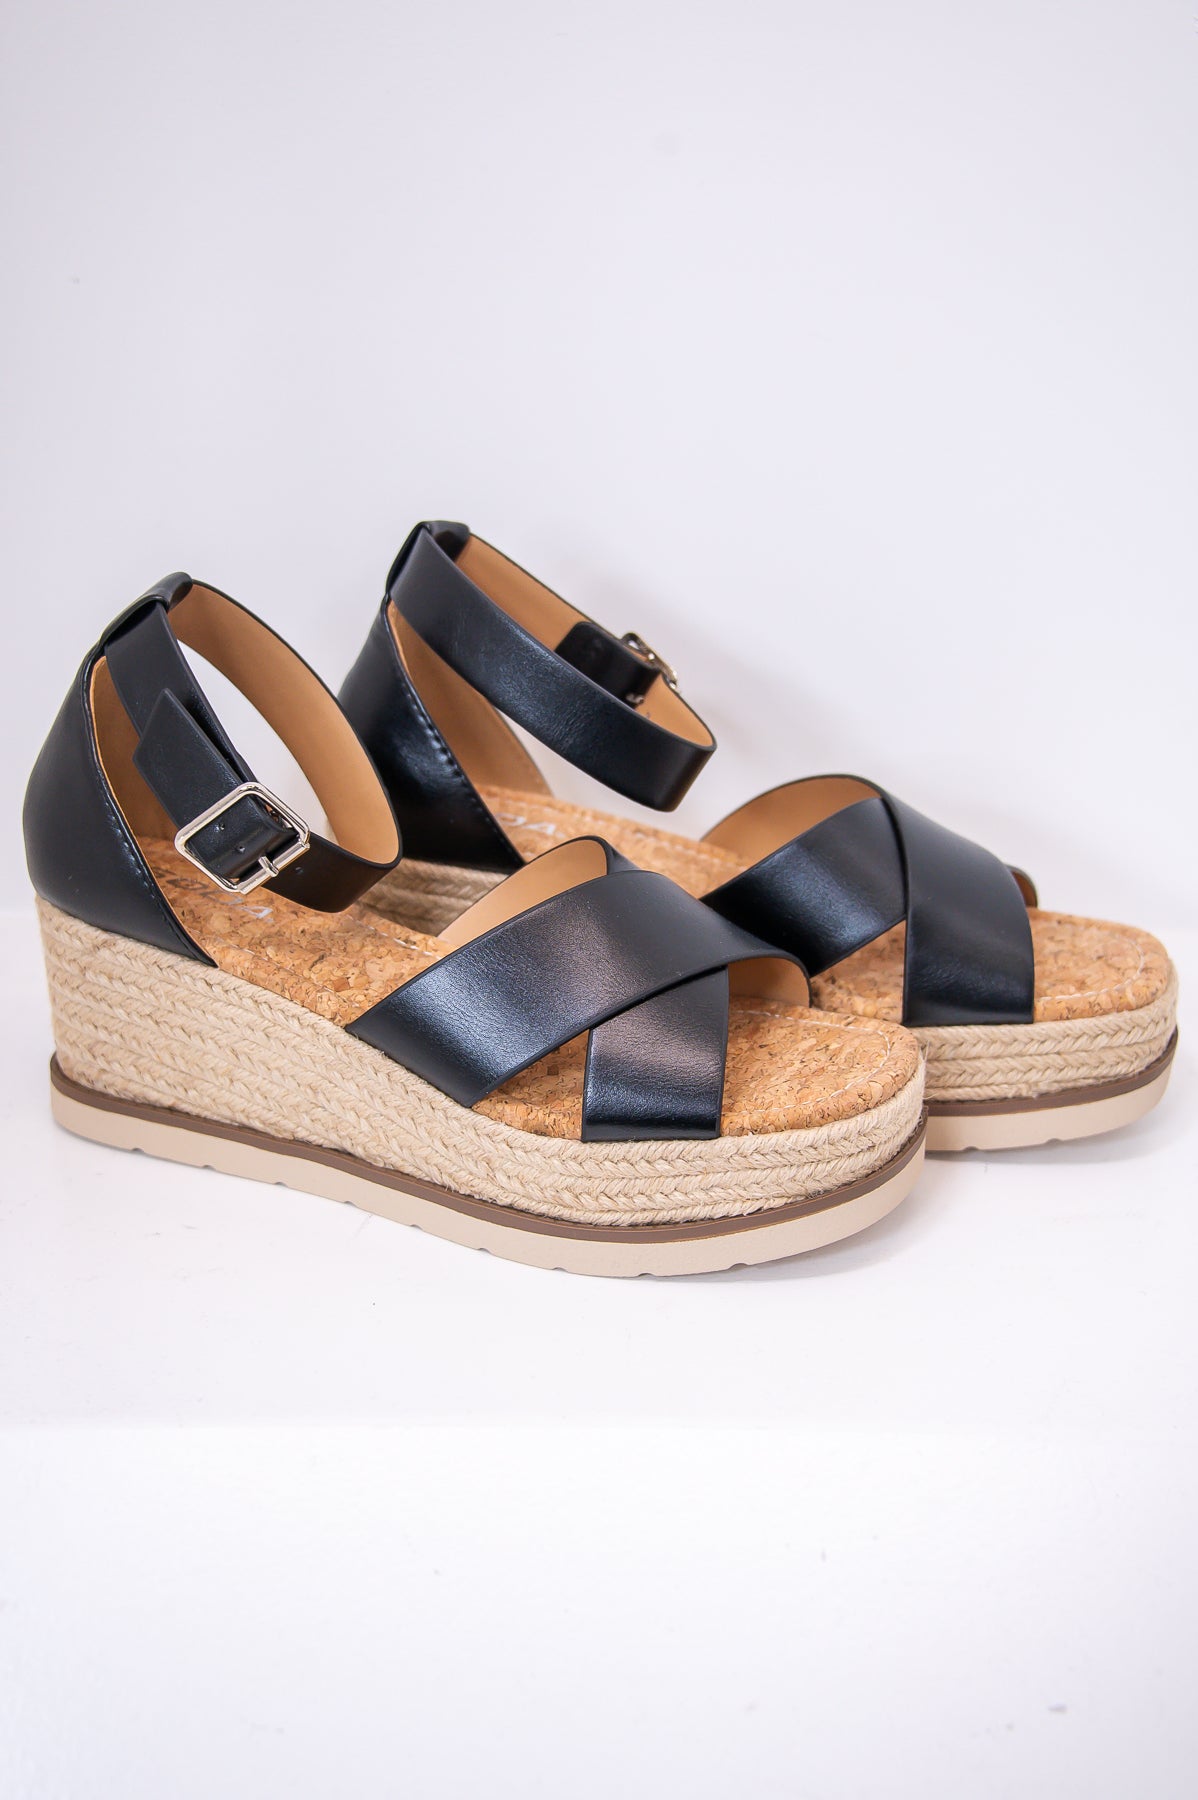 Stepping Up My Game Black/Taupe Espadrille Sandals - SHO2655BK